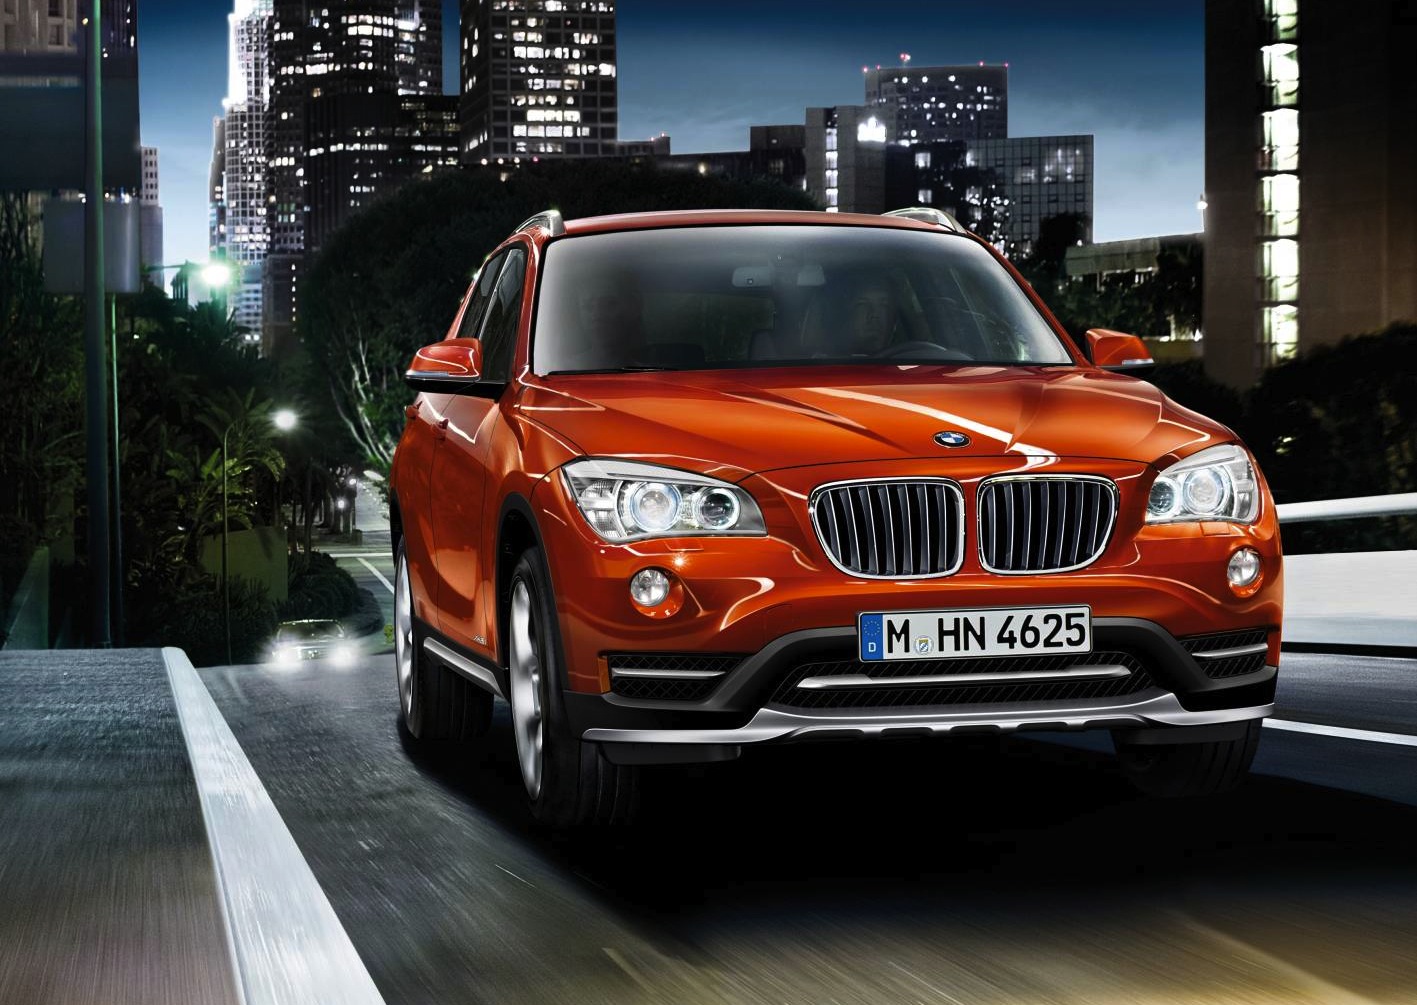 Facelifted 2014 BMW X1 on sale in Australia from $46,300